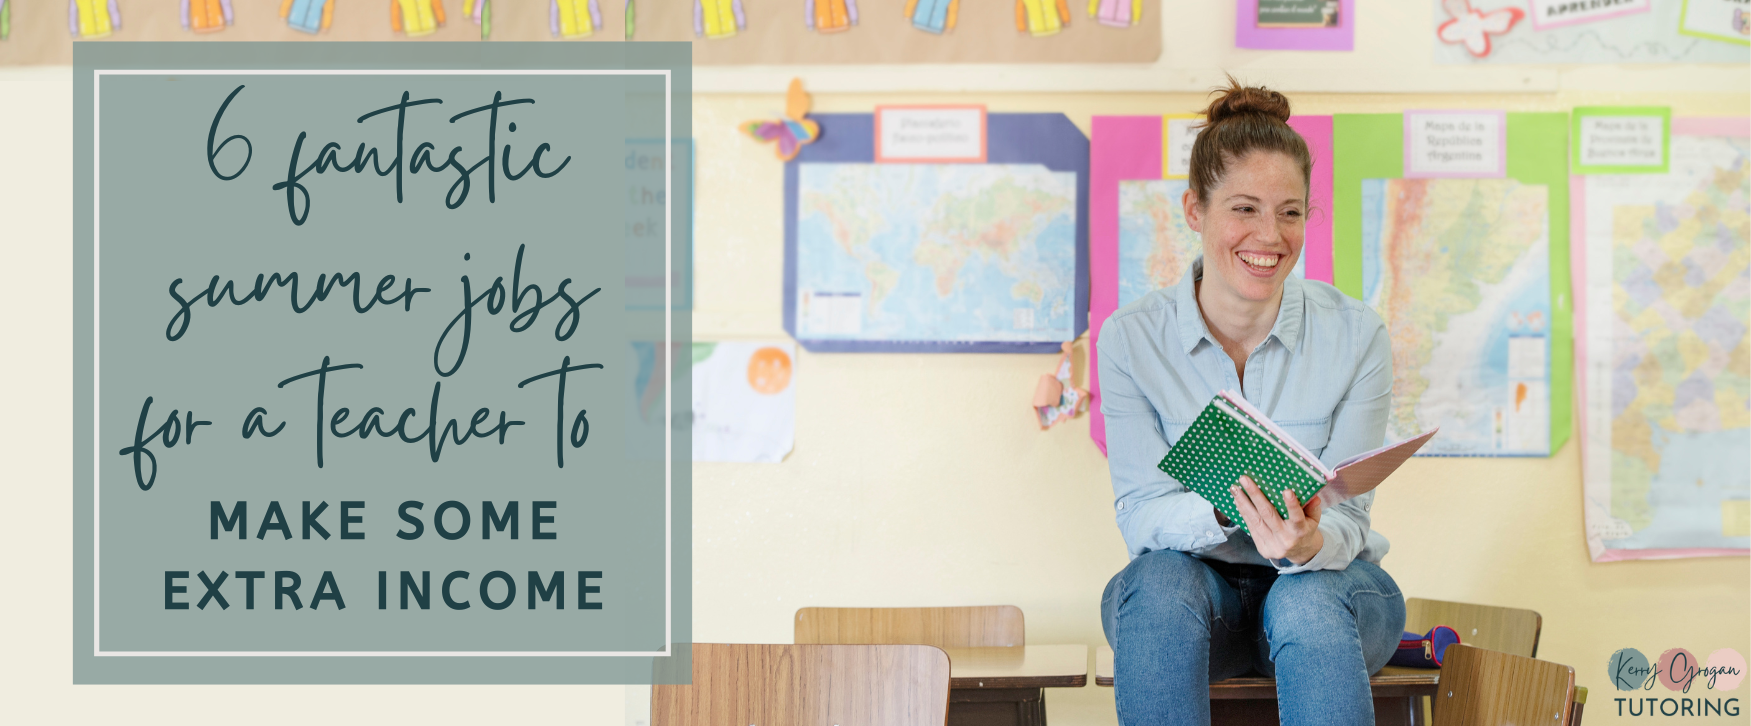 6 fantastic summer jobs for a teacher to make some extra income